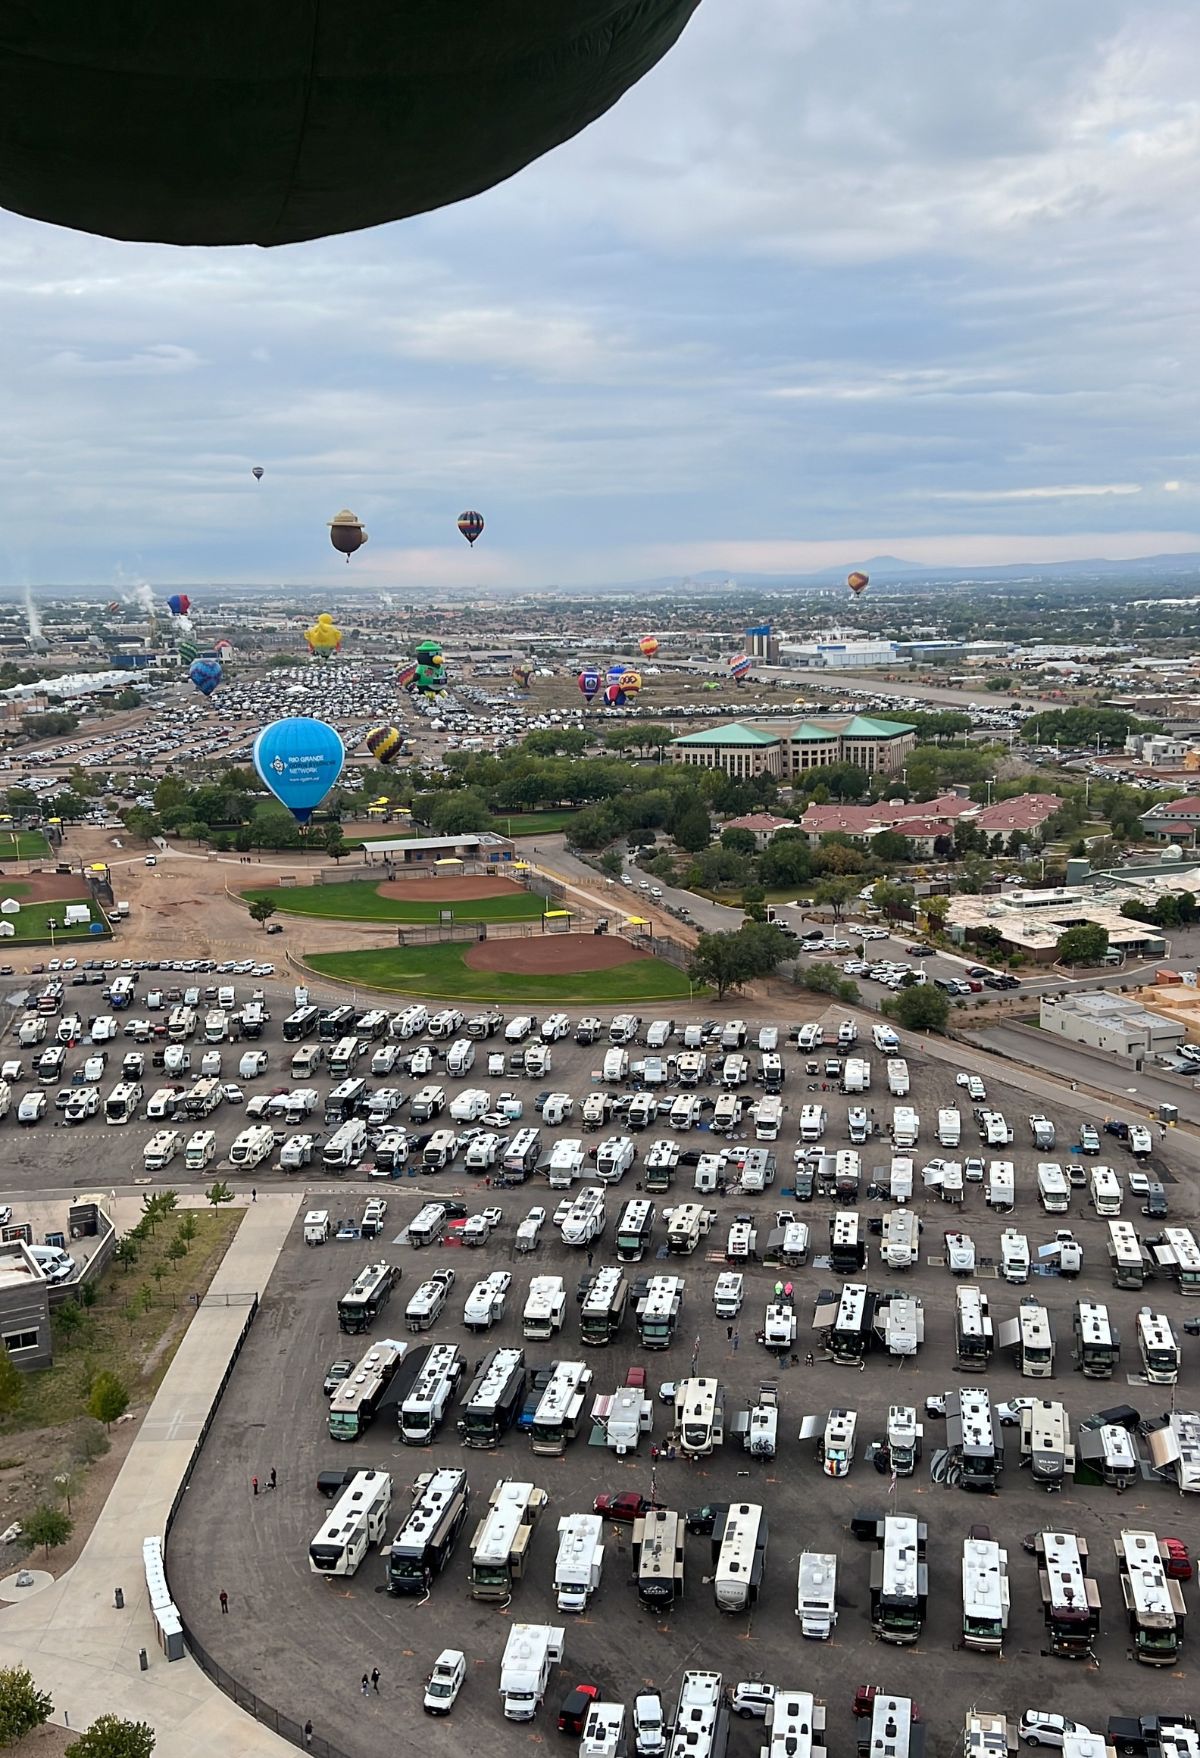 Hot air balloons flying over a parking lot.